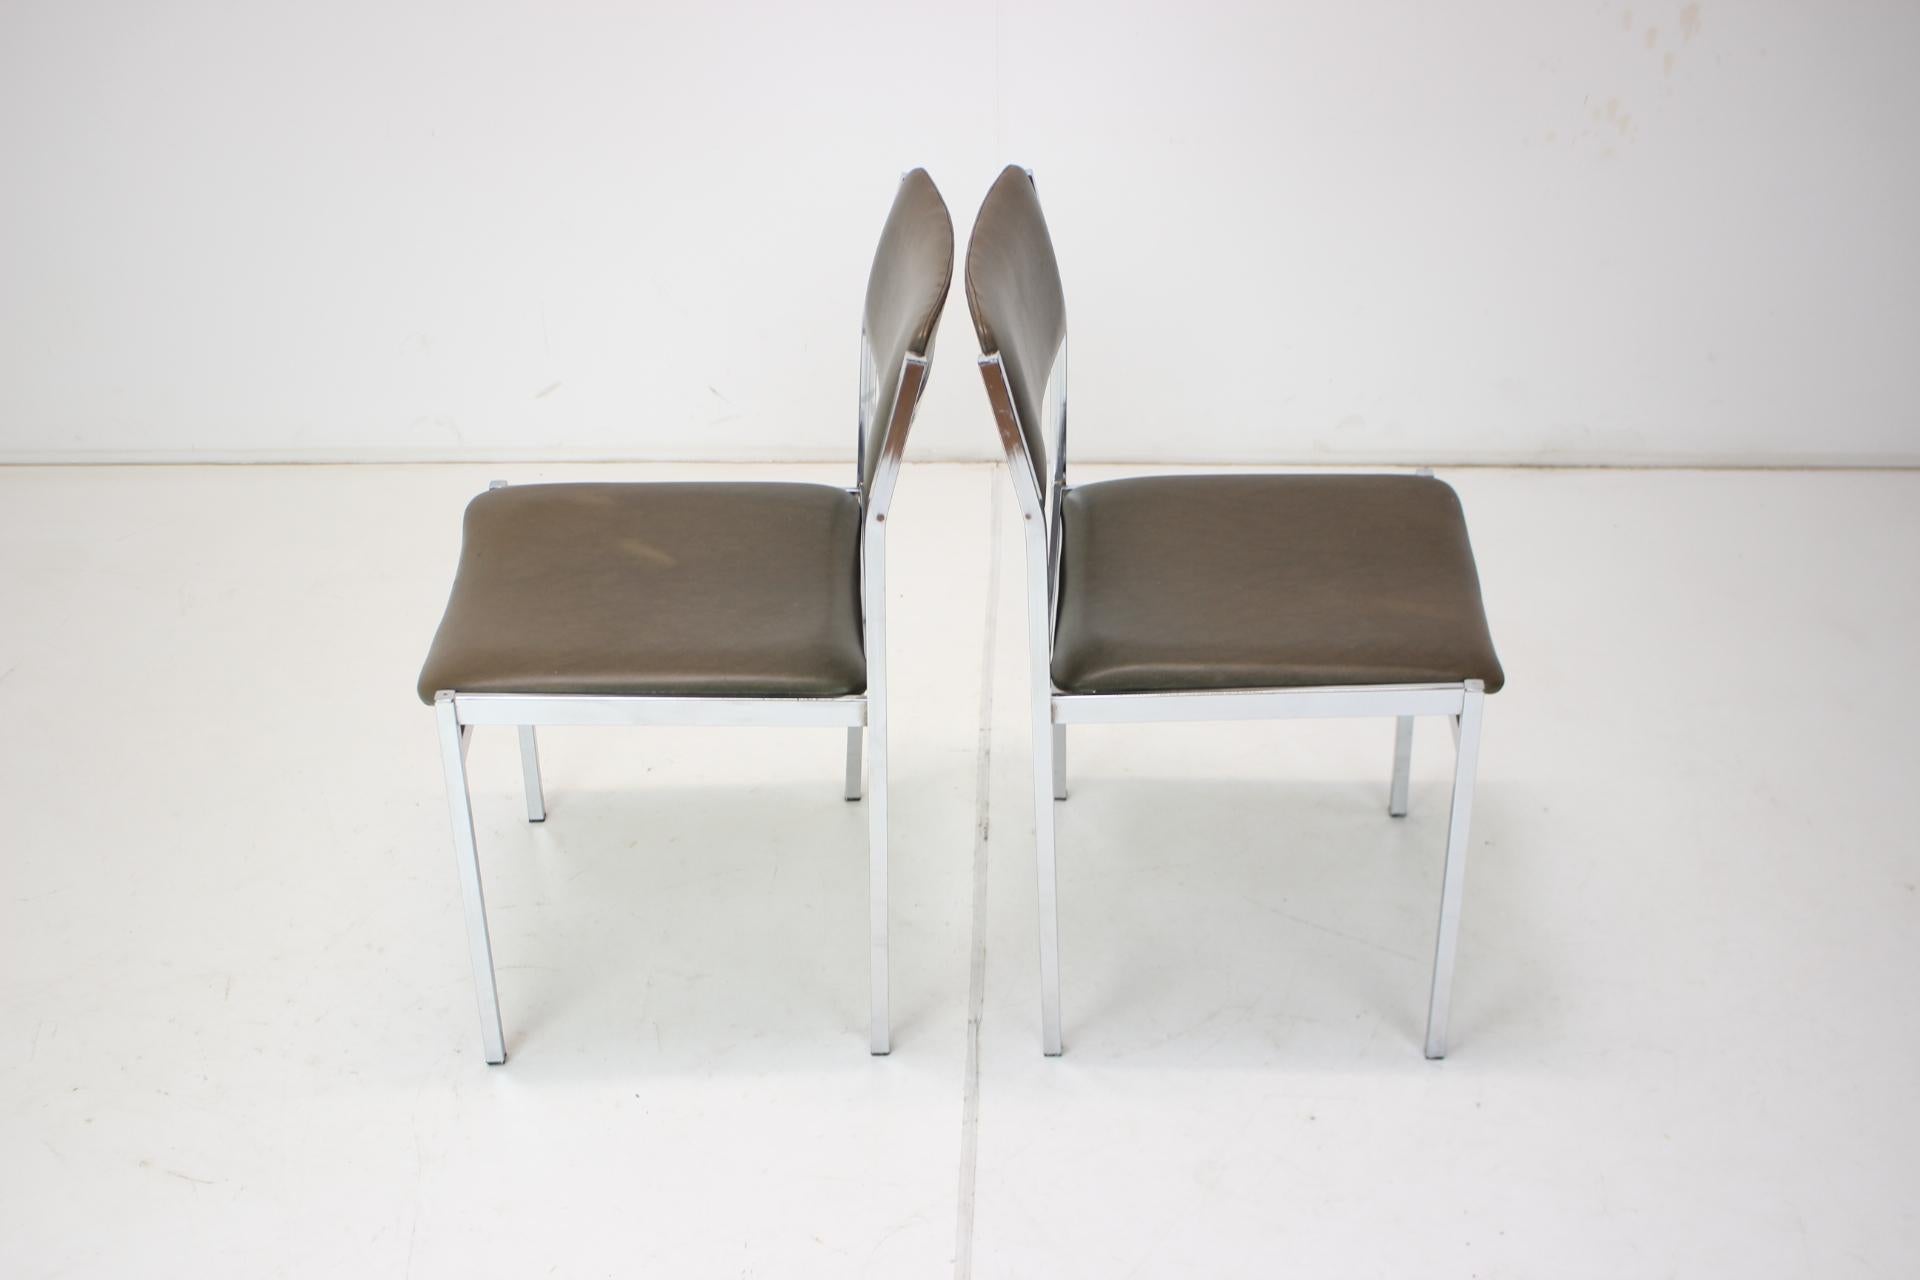 Set of Two Chrome Chairs, 1970's For Sale 1